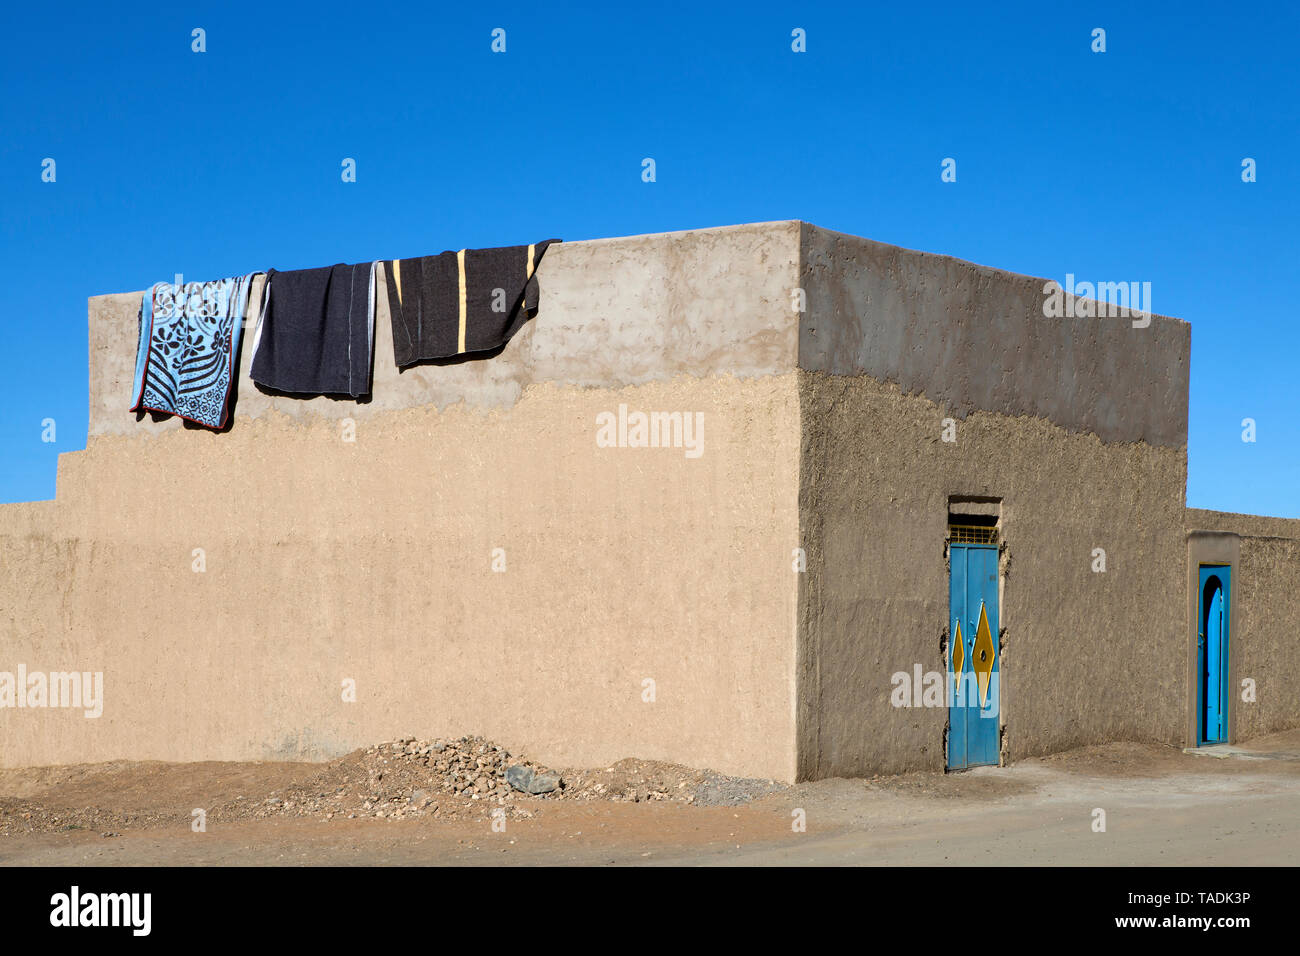 Morocco, Merzouga, Erg Chebbi, rammed earth building in oasis town Taouz Stock Photo